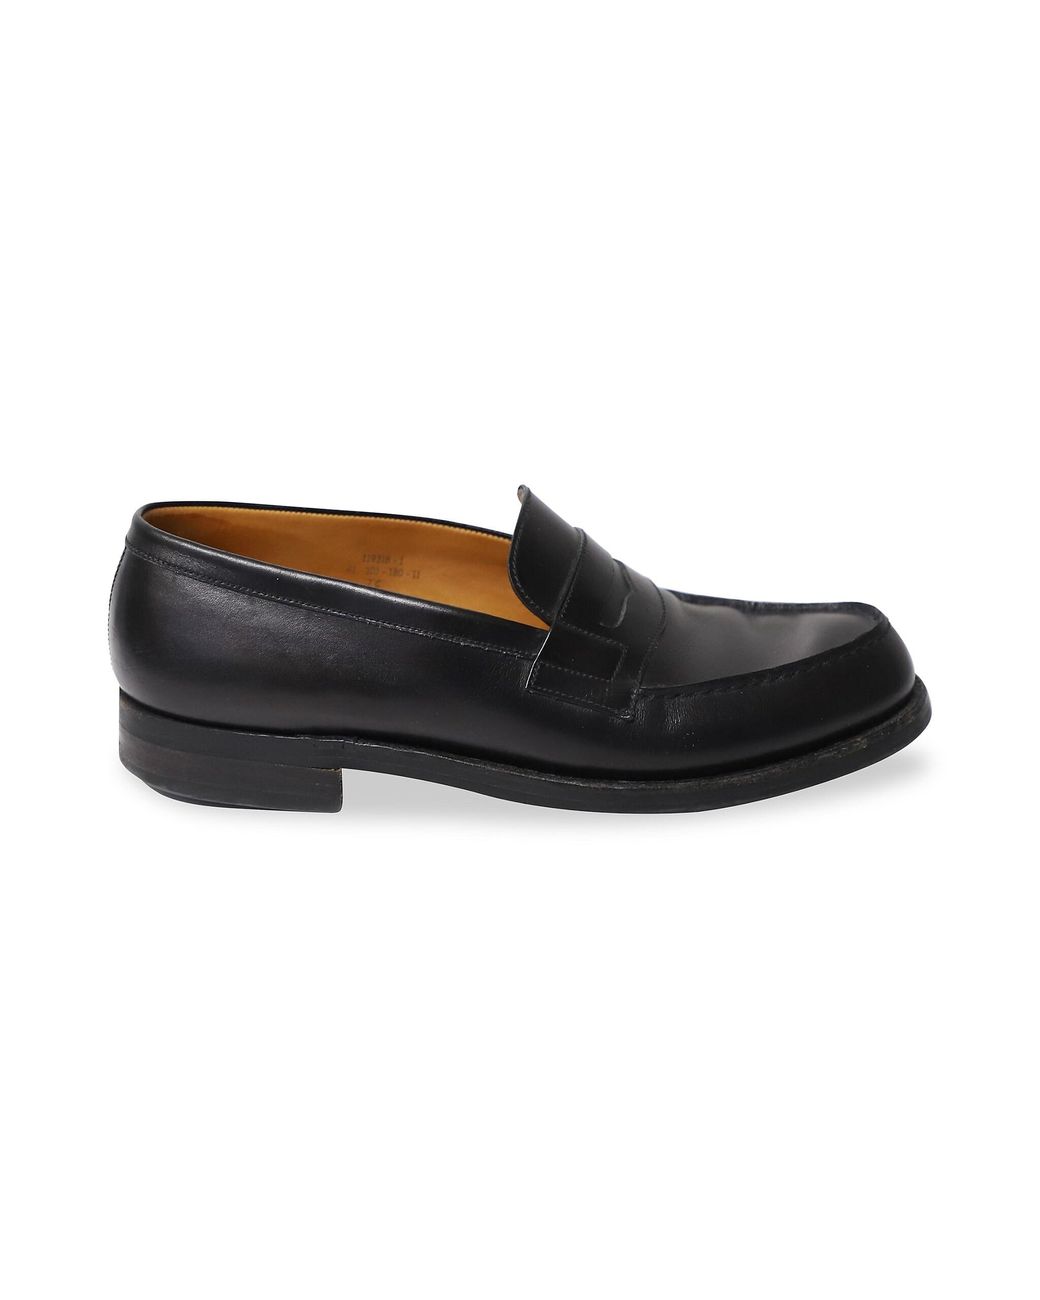 J.M. Weston J.m Weston 180 Penny Loafers In Black Moccasin Leather for